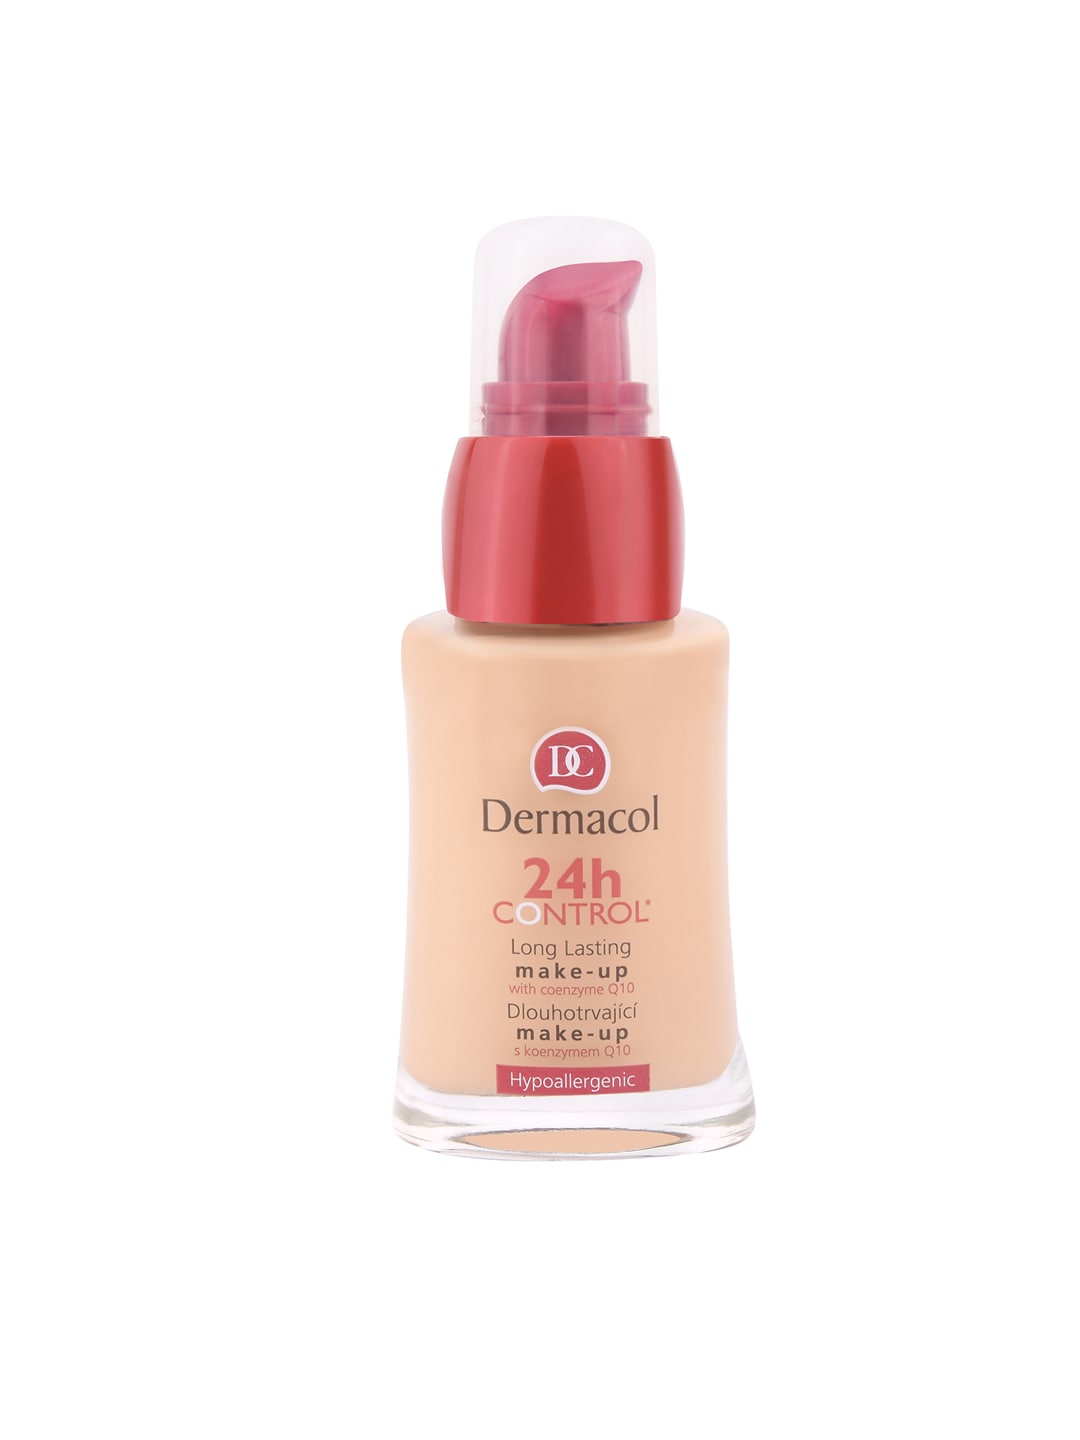 Dermacol 24H Control Make-up Foundation Cream 90 - 30 ml Price in India